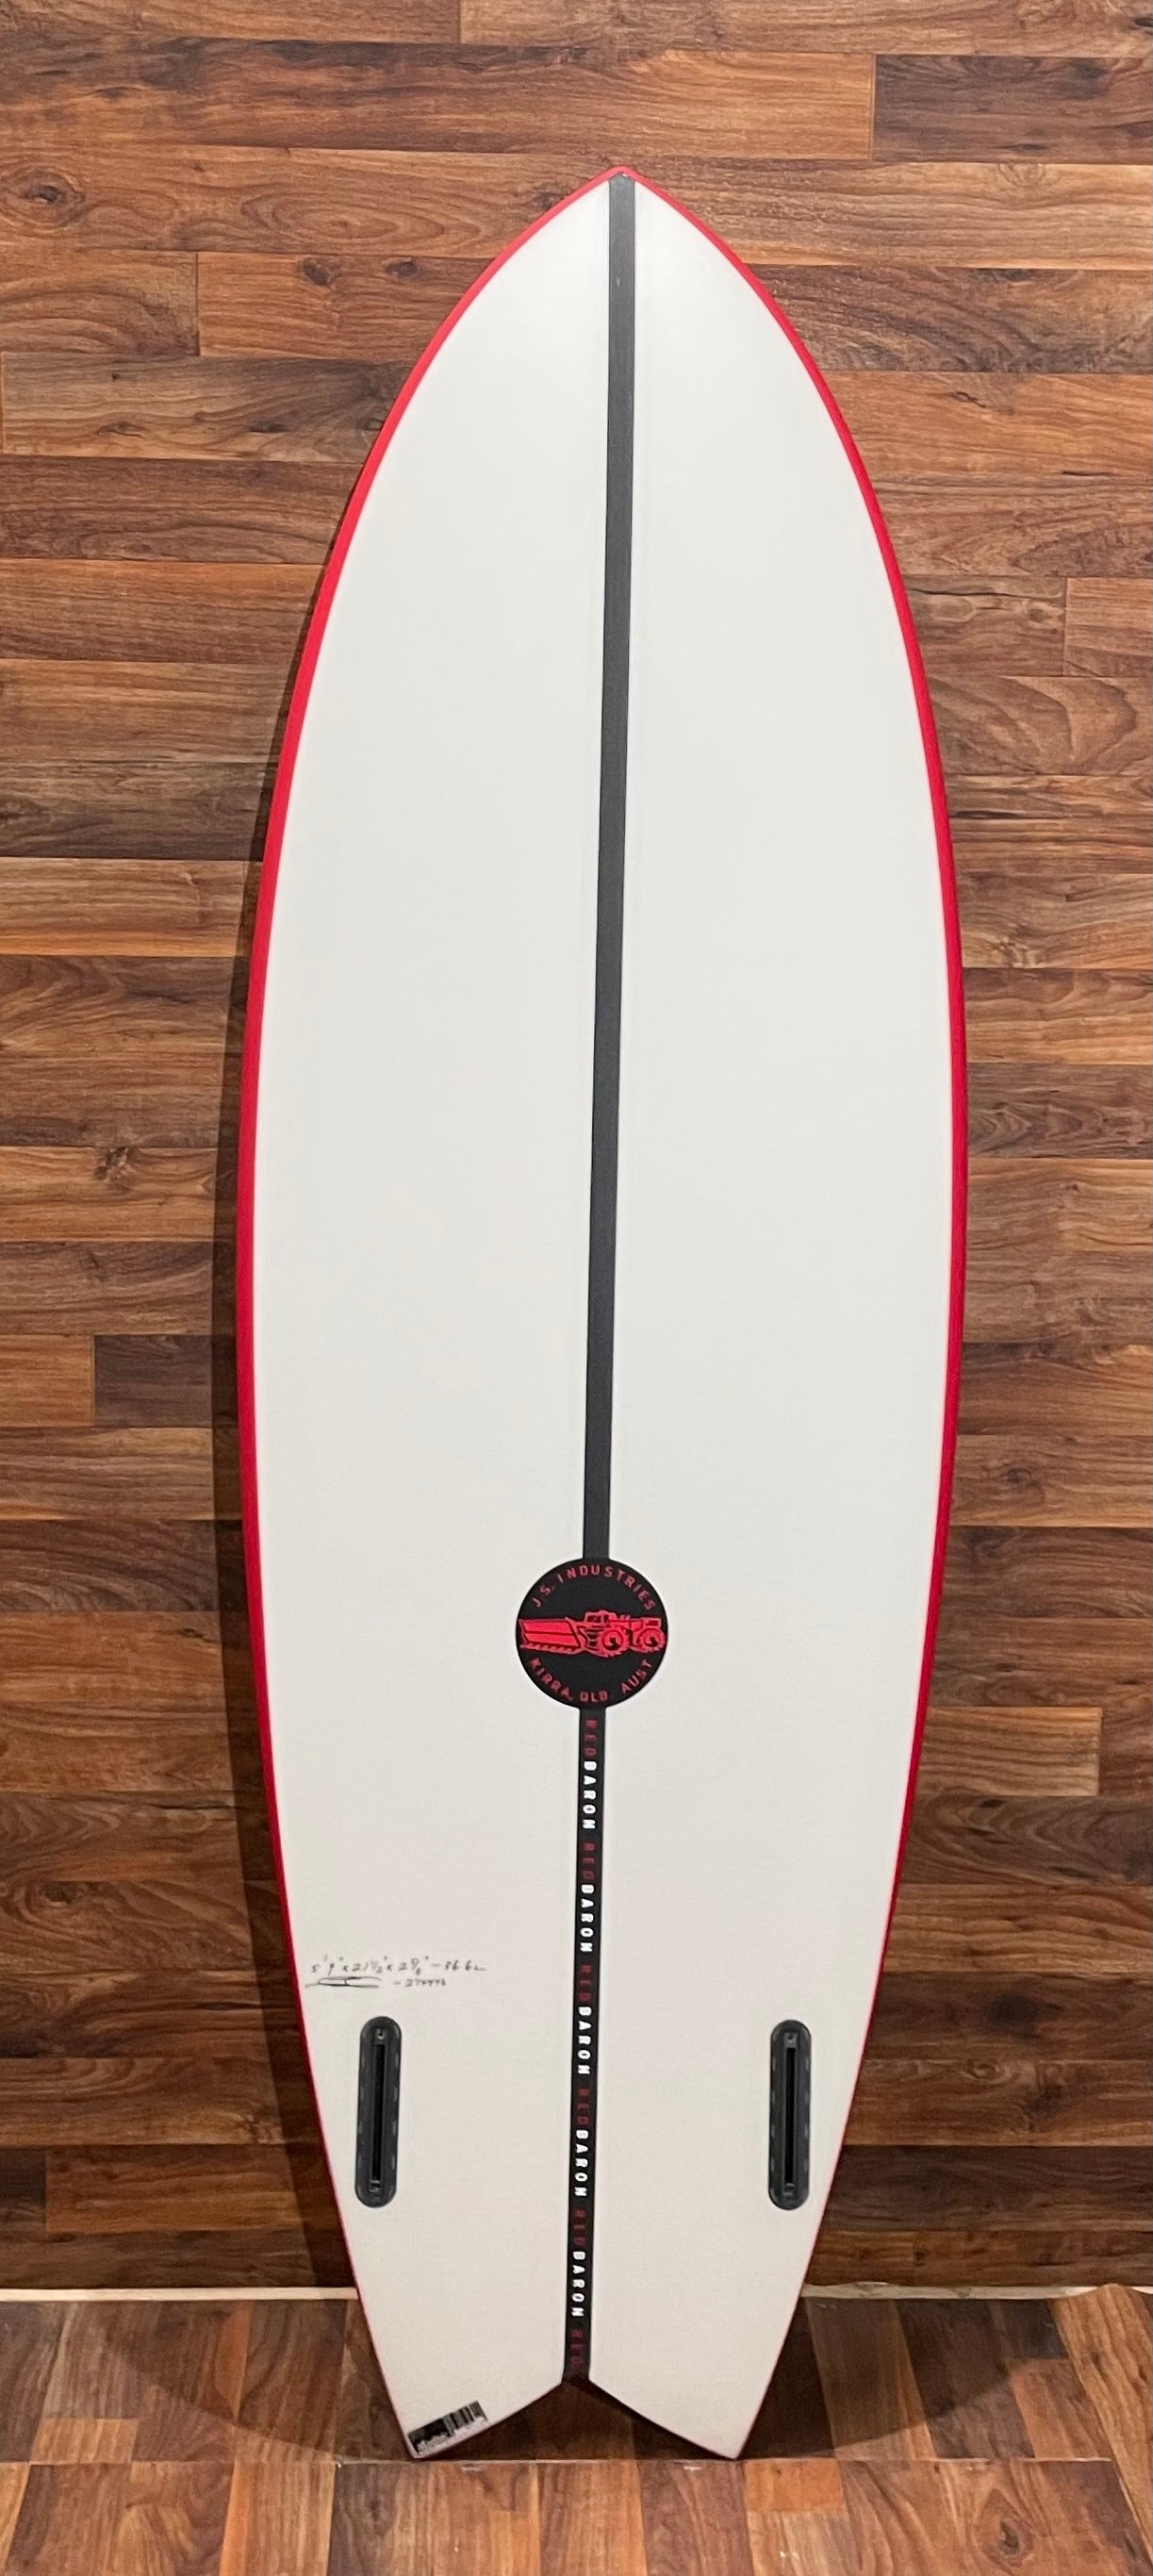 JS RED BARON 5'9" SURFBOARD